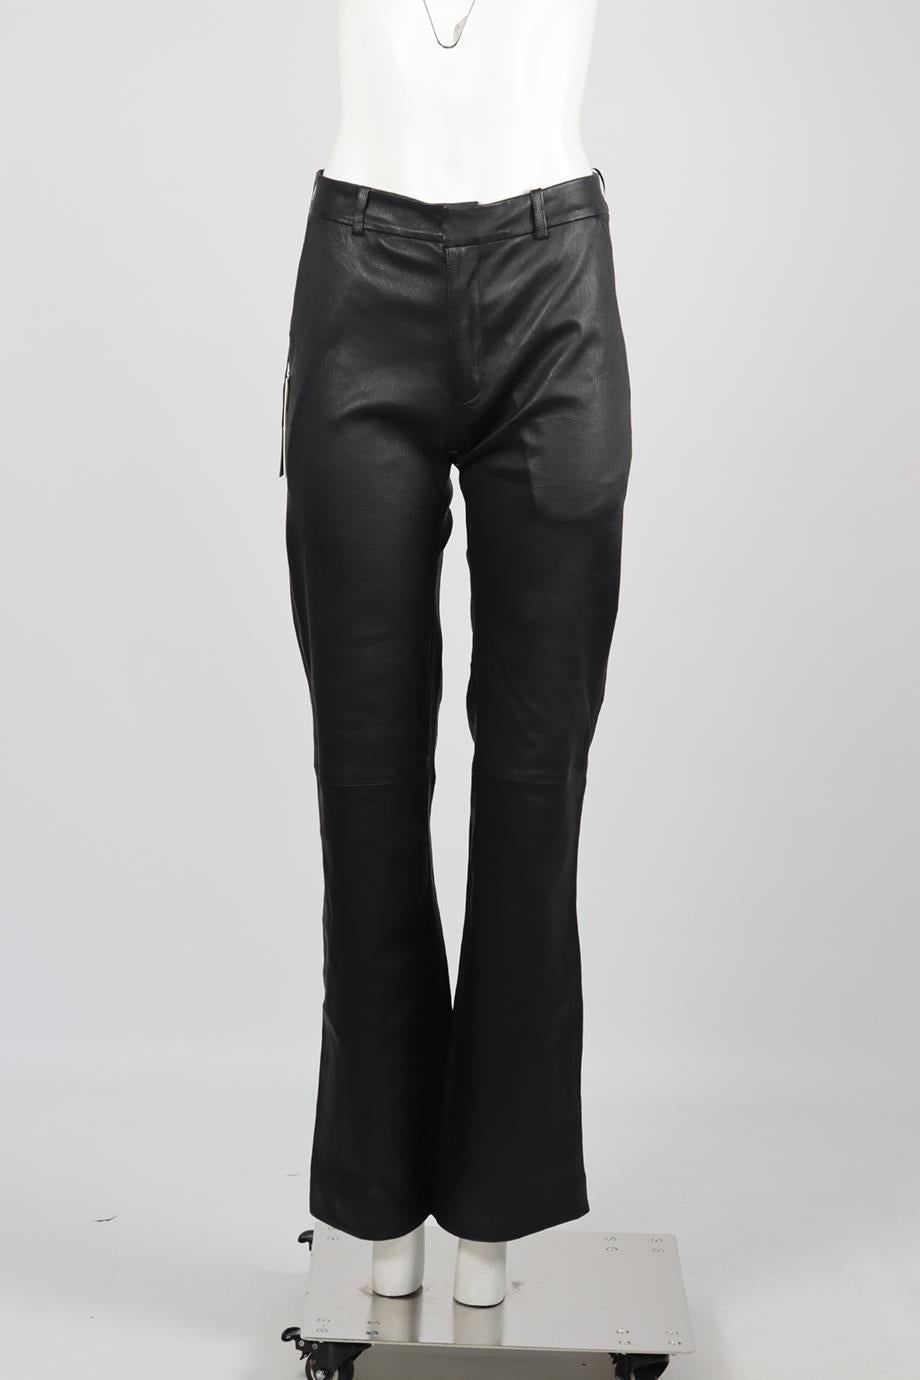 SPRWMN LEATHER FLARED PANTS SMALL